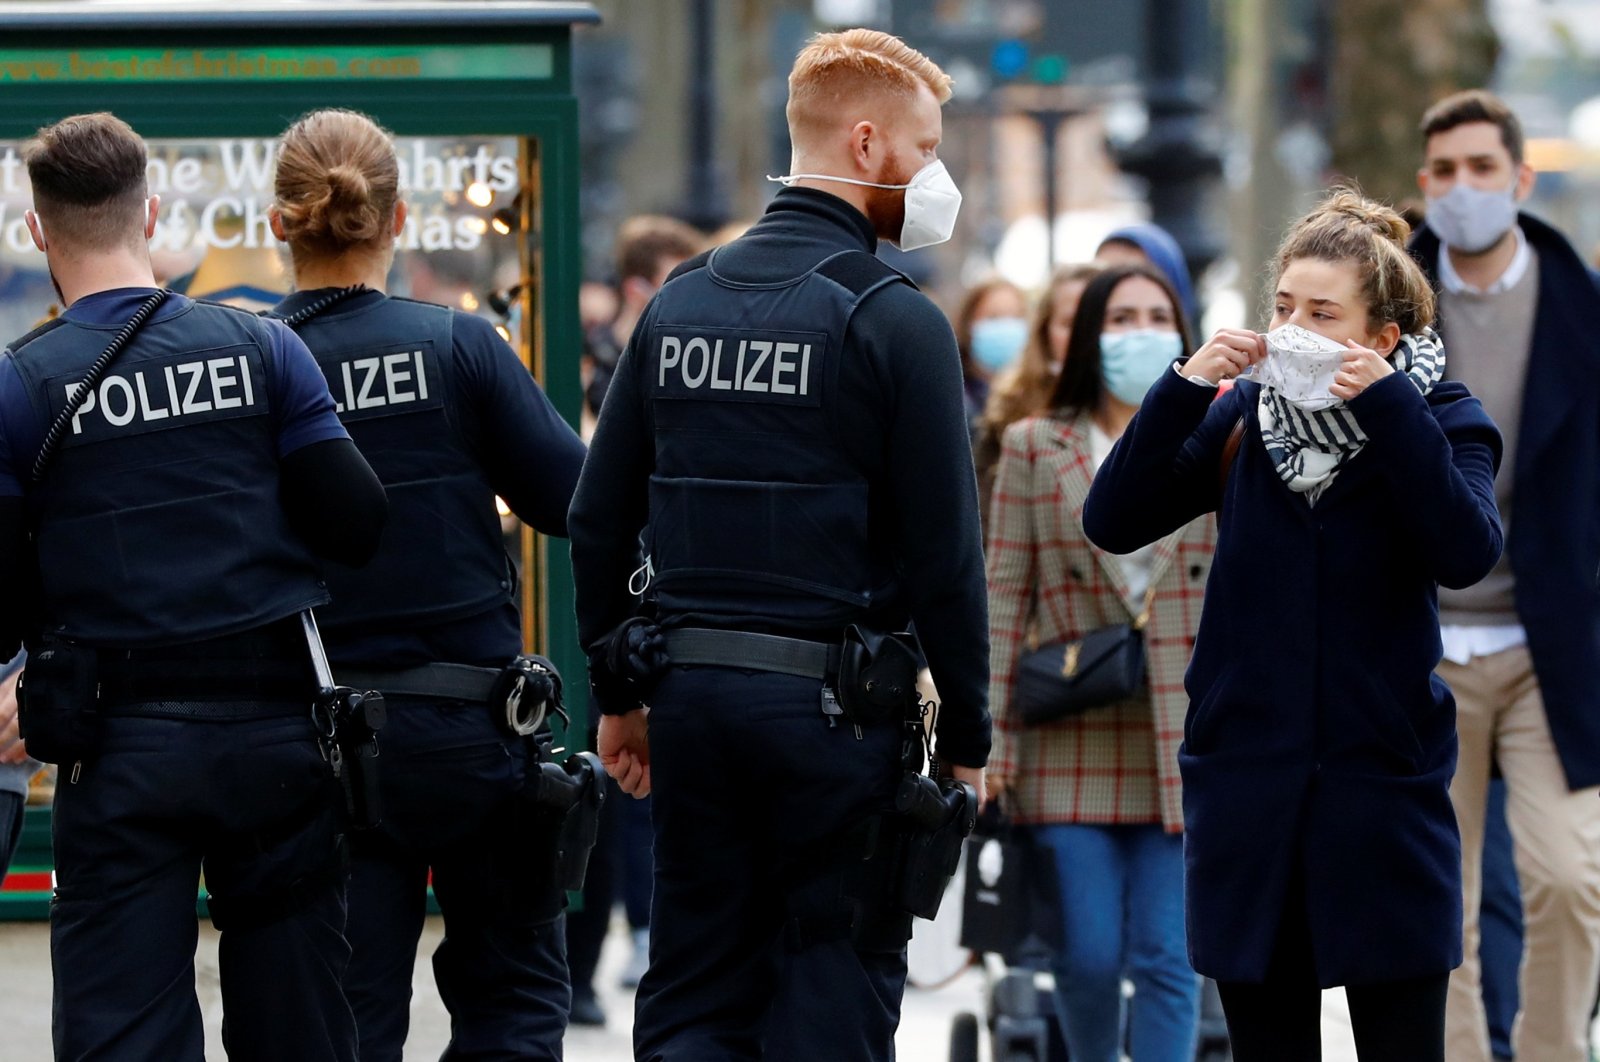 Police officers check that people are wearing face masks on Kurfuerstendamm boulevard amid the COVID-19 outbreak, Berlin, Germany, Oct. 24, 2020. (Reuters Photo)